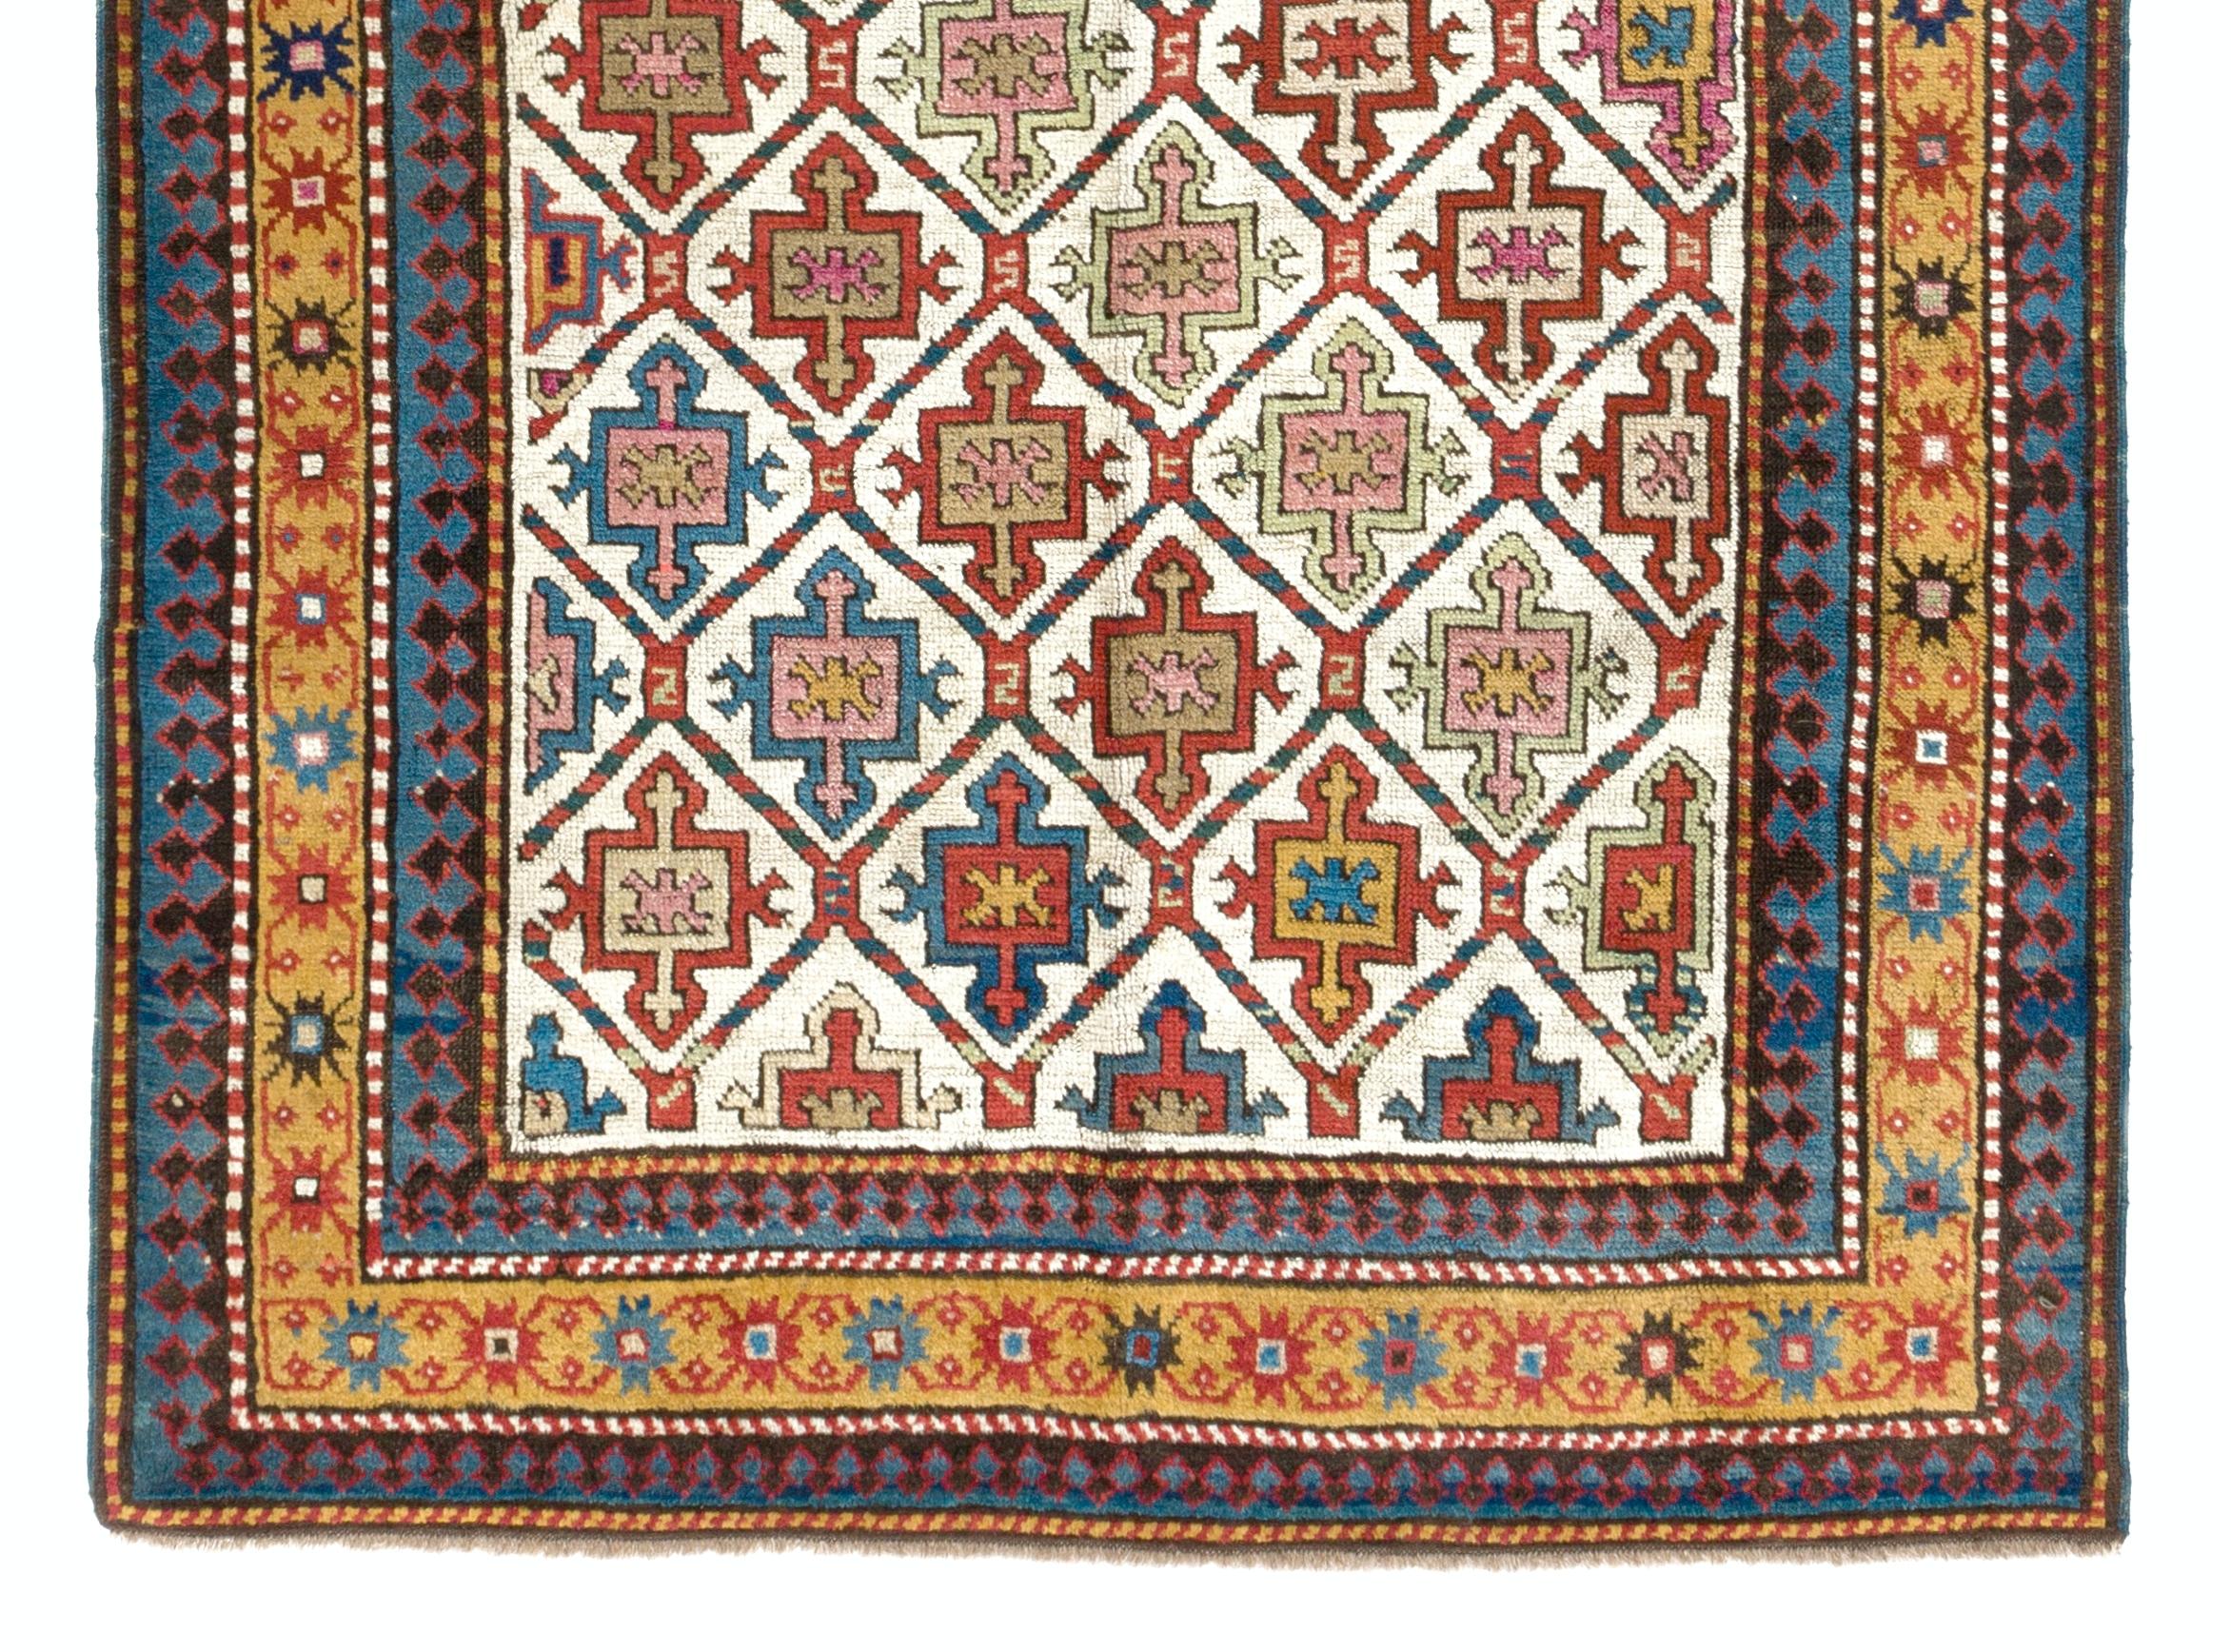 A rare and early Karabagh long rug from the first quarter of the 19th century featuring an all-over lattice work design with integrated shield and cross motifs in a subtle color palette of soft pink, sage green, beige, rust, navy blue and cerulean